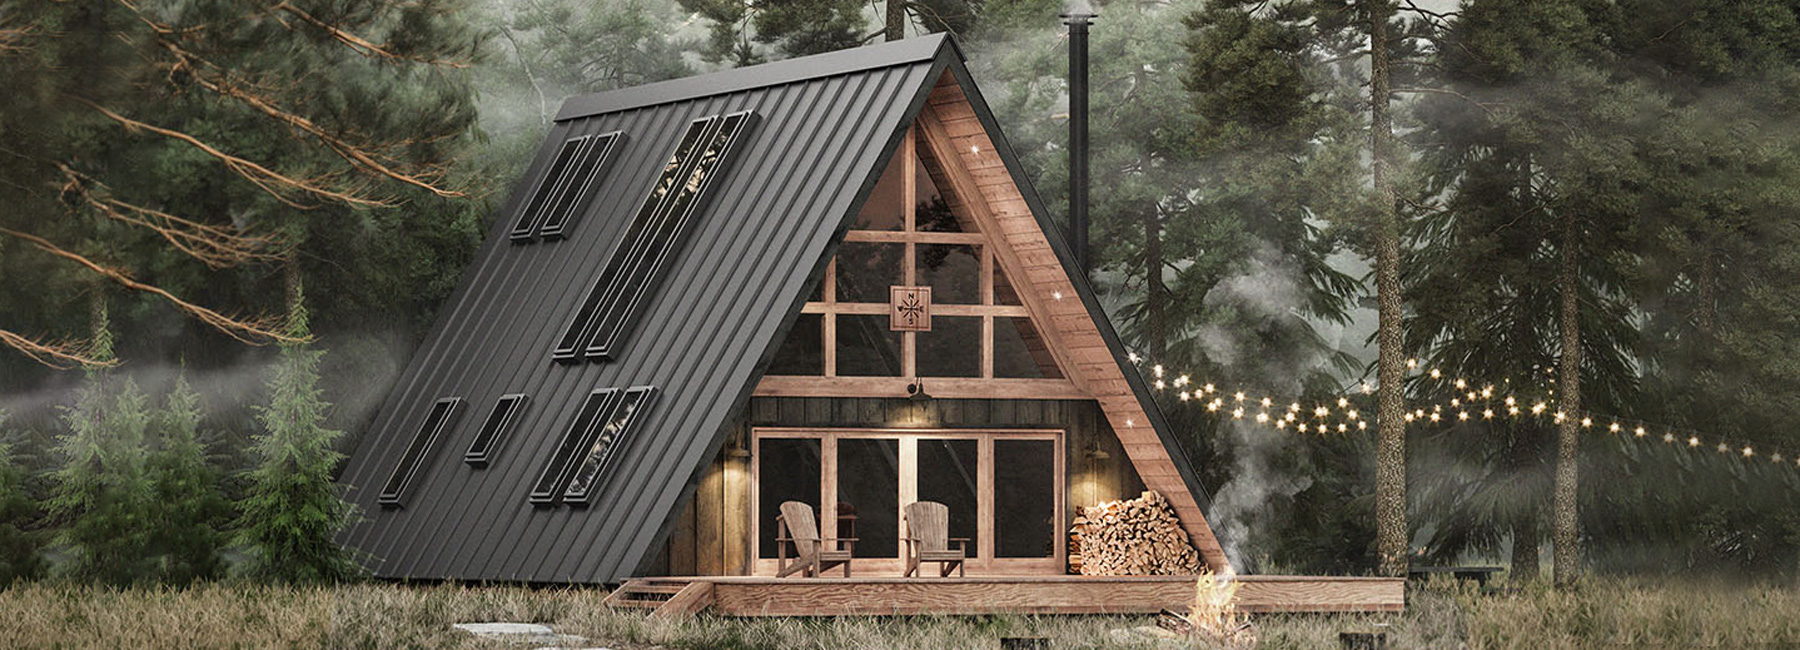 Ayfraym Is An Affordable A Frame Cabin In A Box Concept